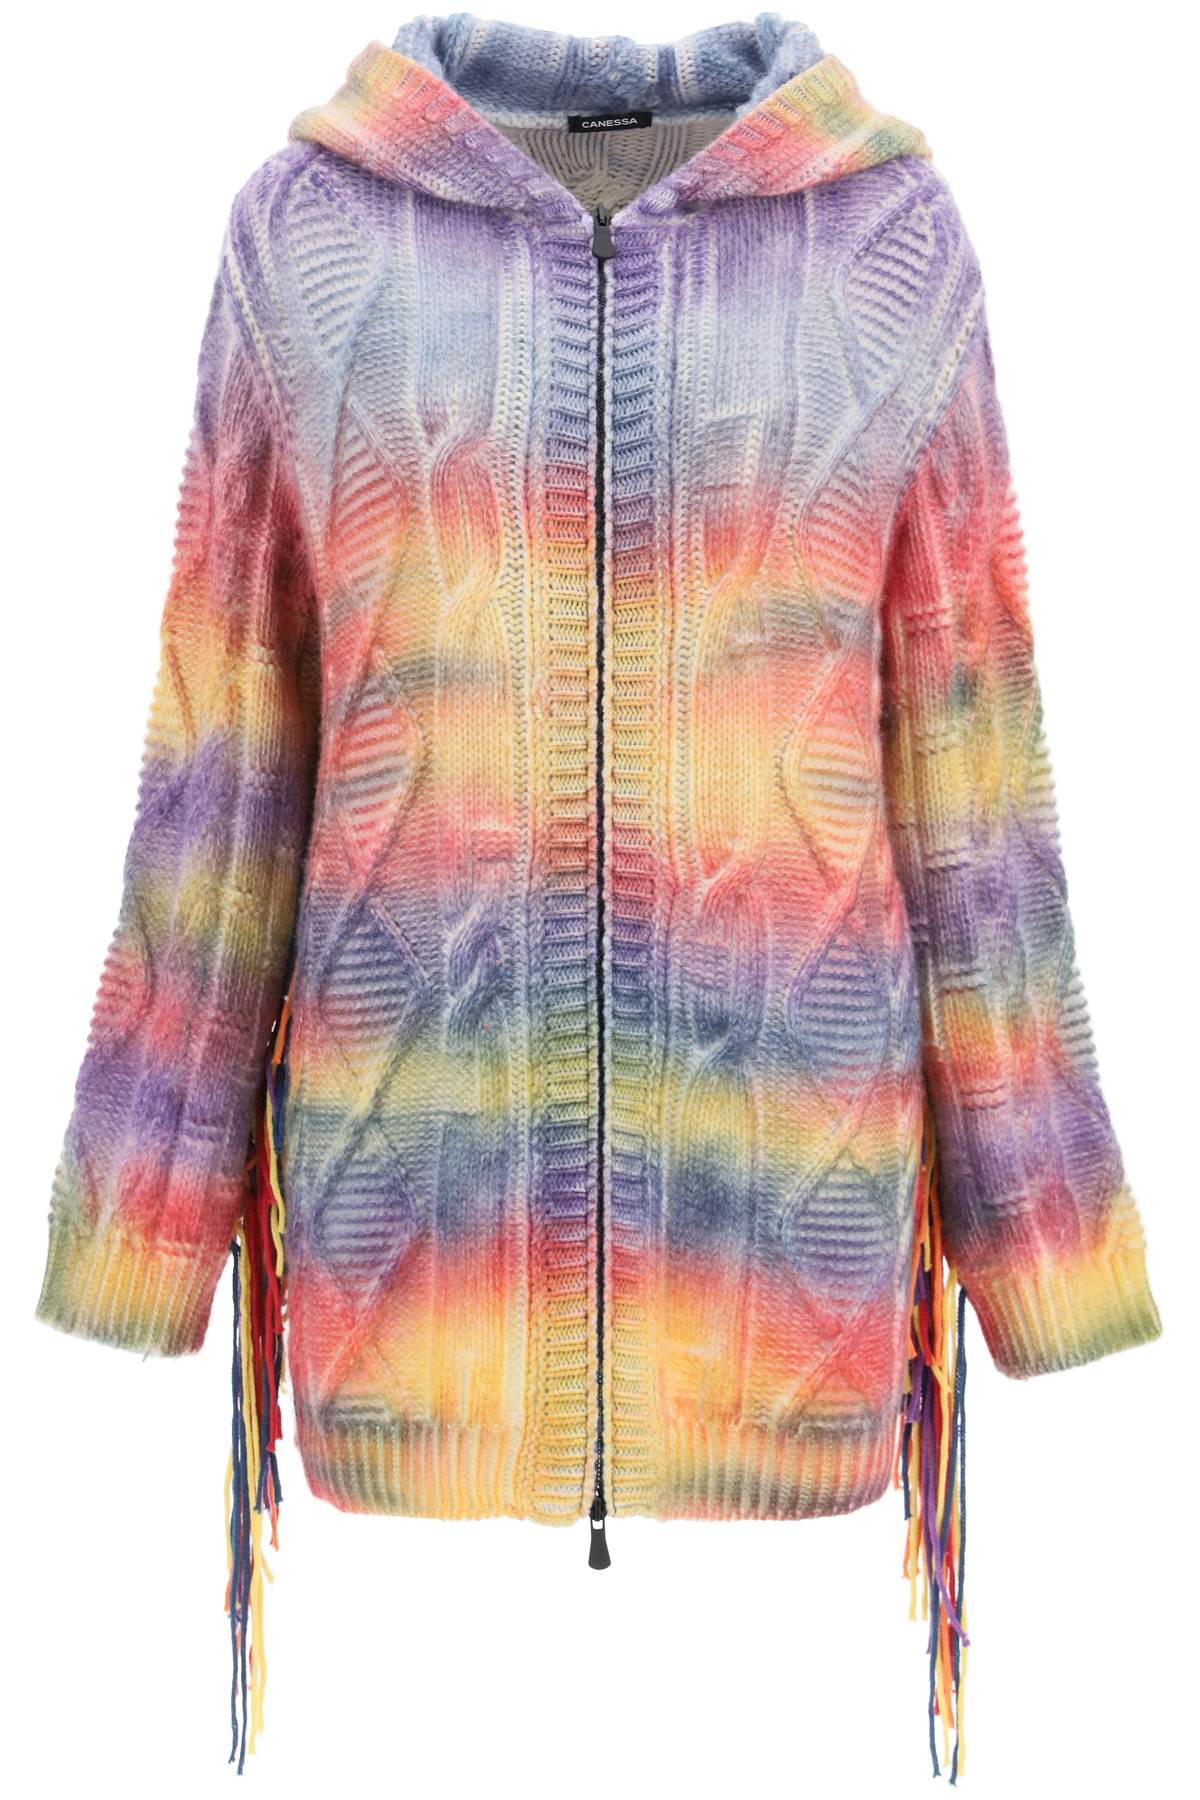 Canessa nordic Rave Hooded Cashmere Cardigan